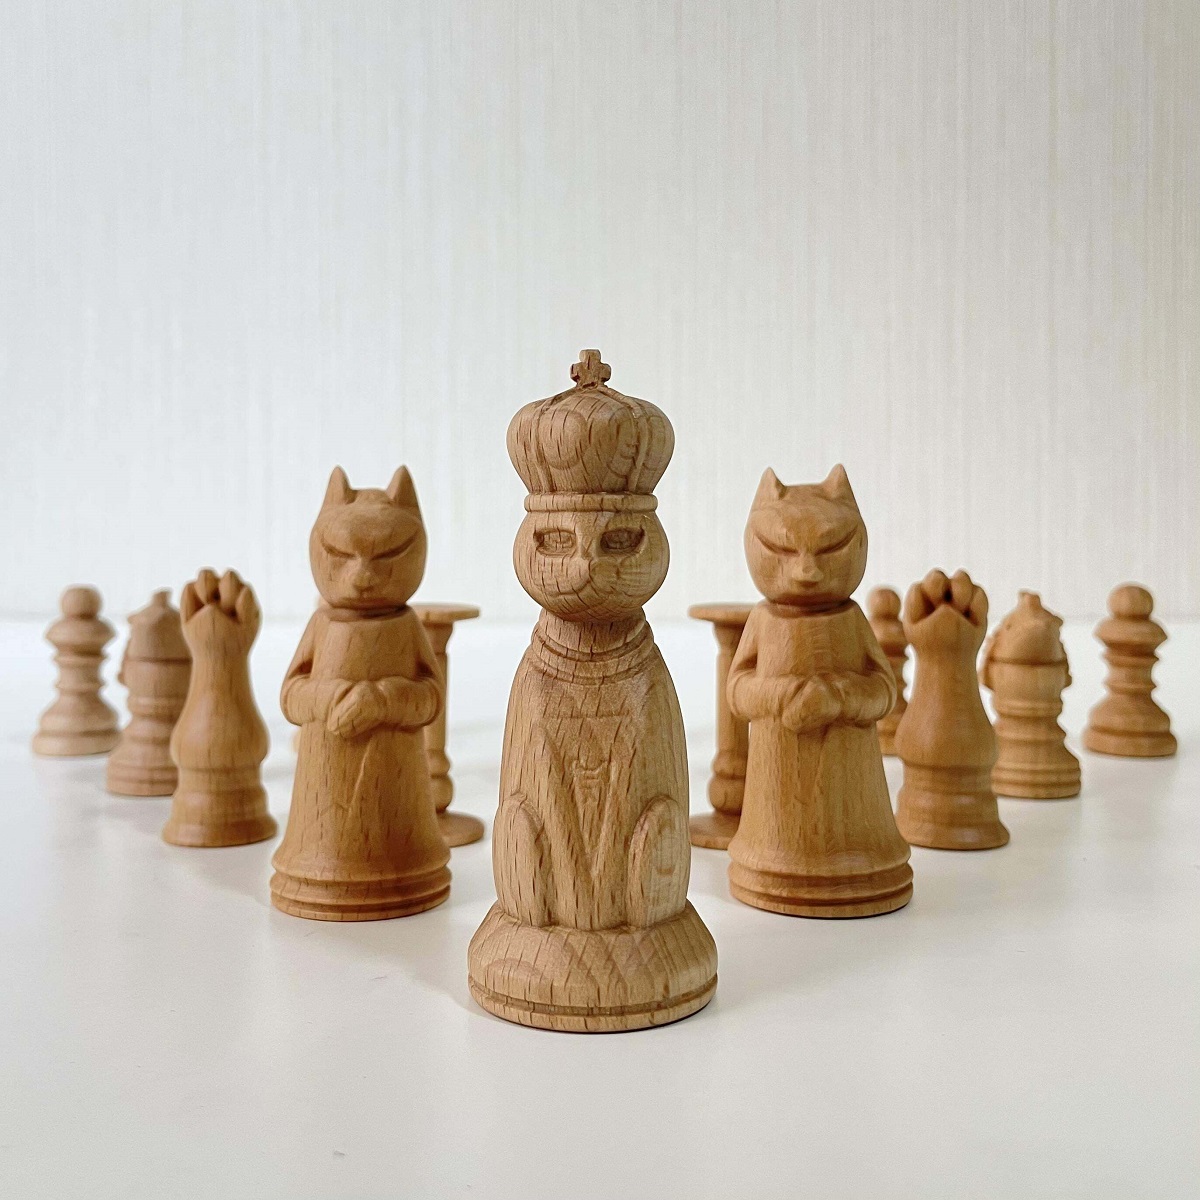 This Is A Cat-Themed Wooden Chess Set That I Designed And Sculpted Myself